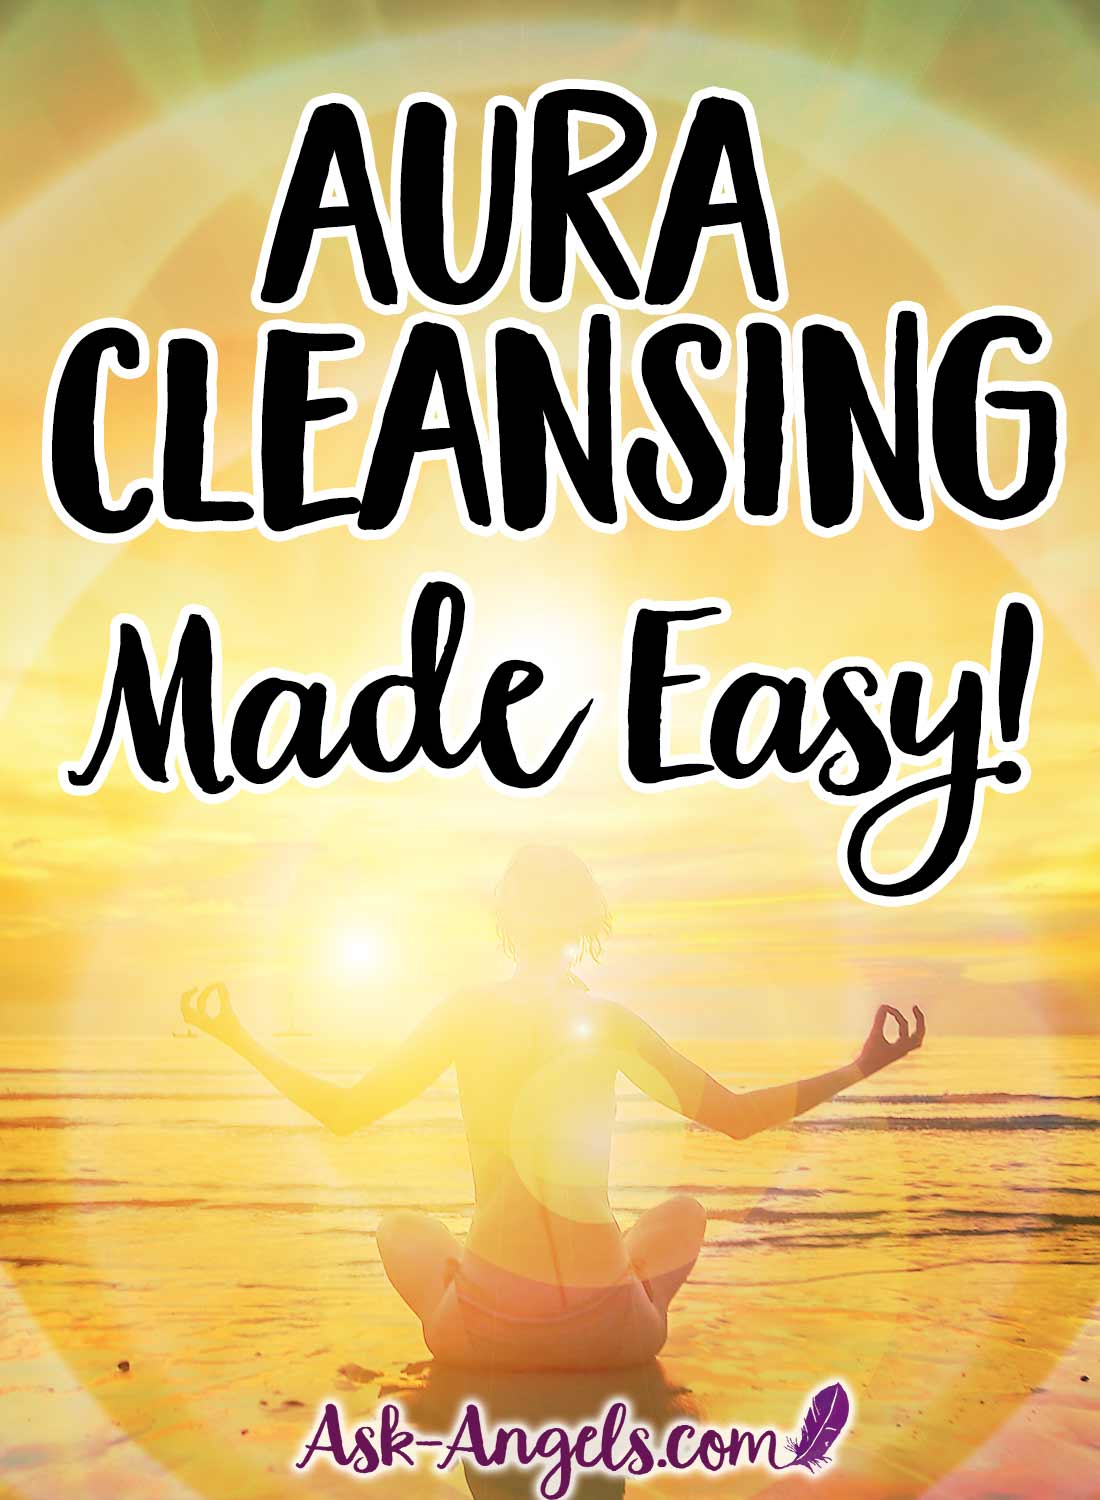 Aura Cleansing Made Easy with this powerful and yet simple technique